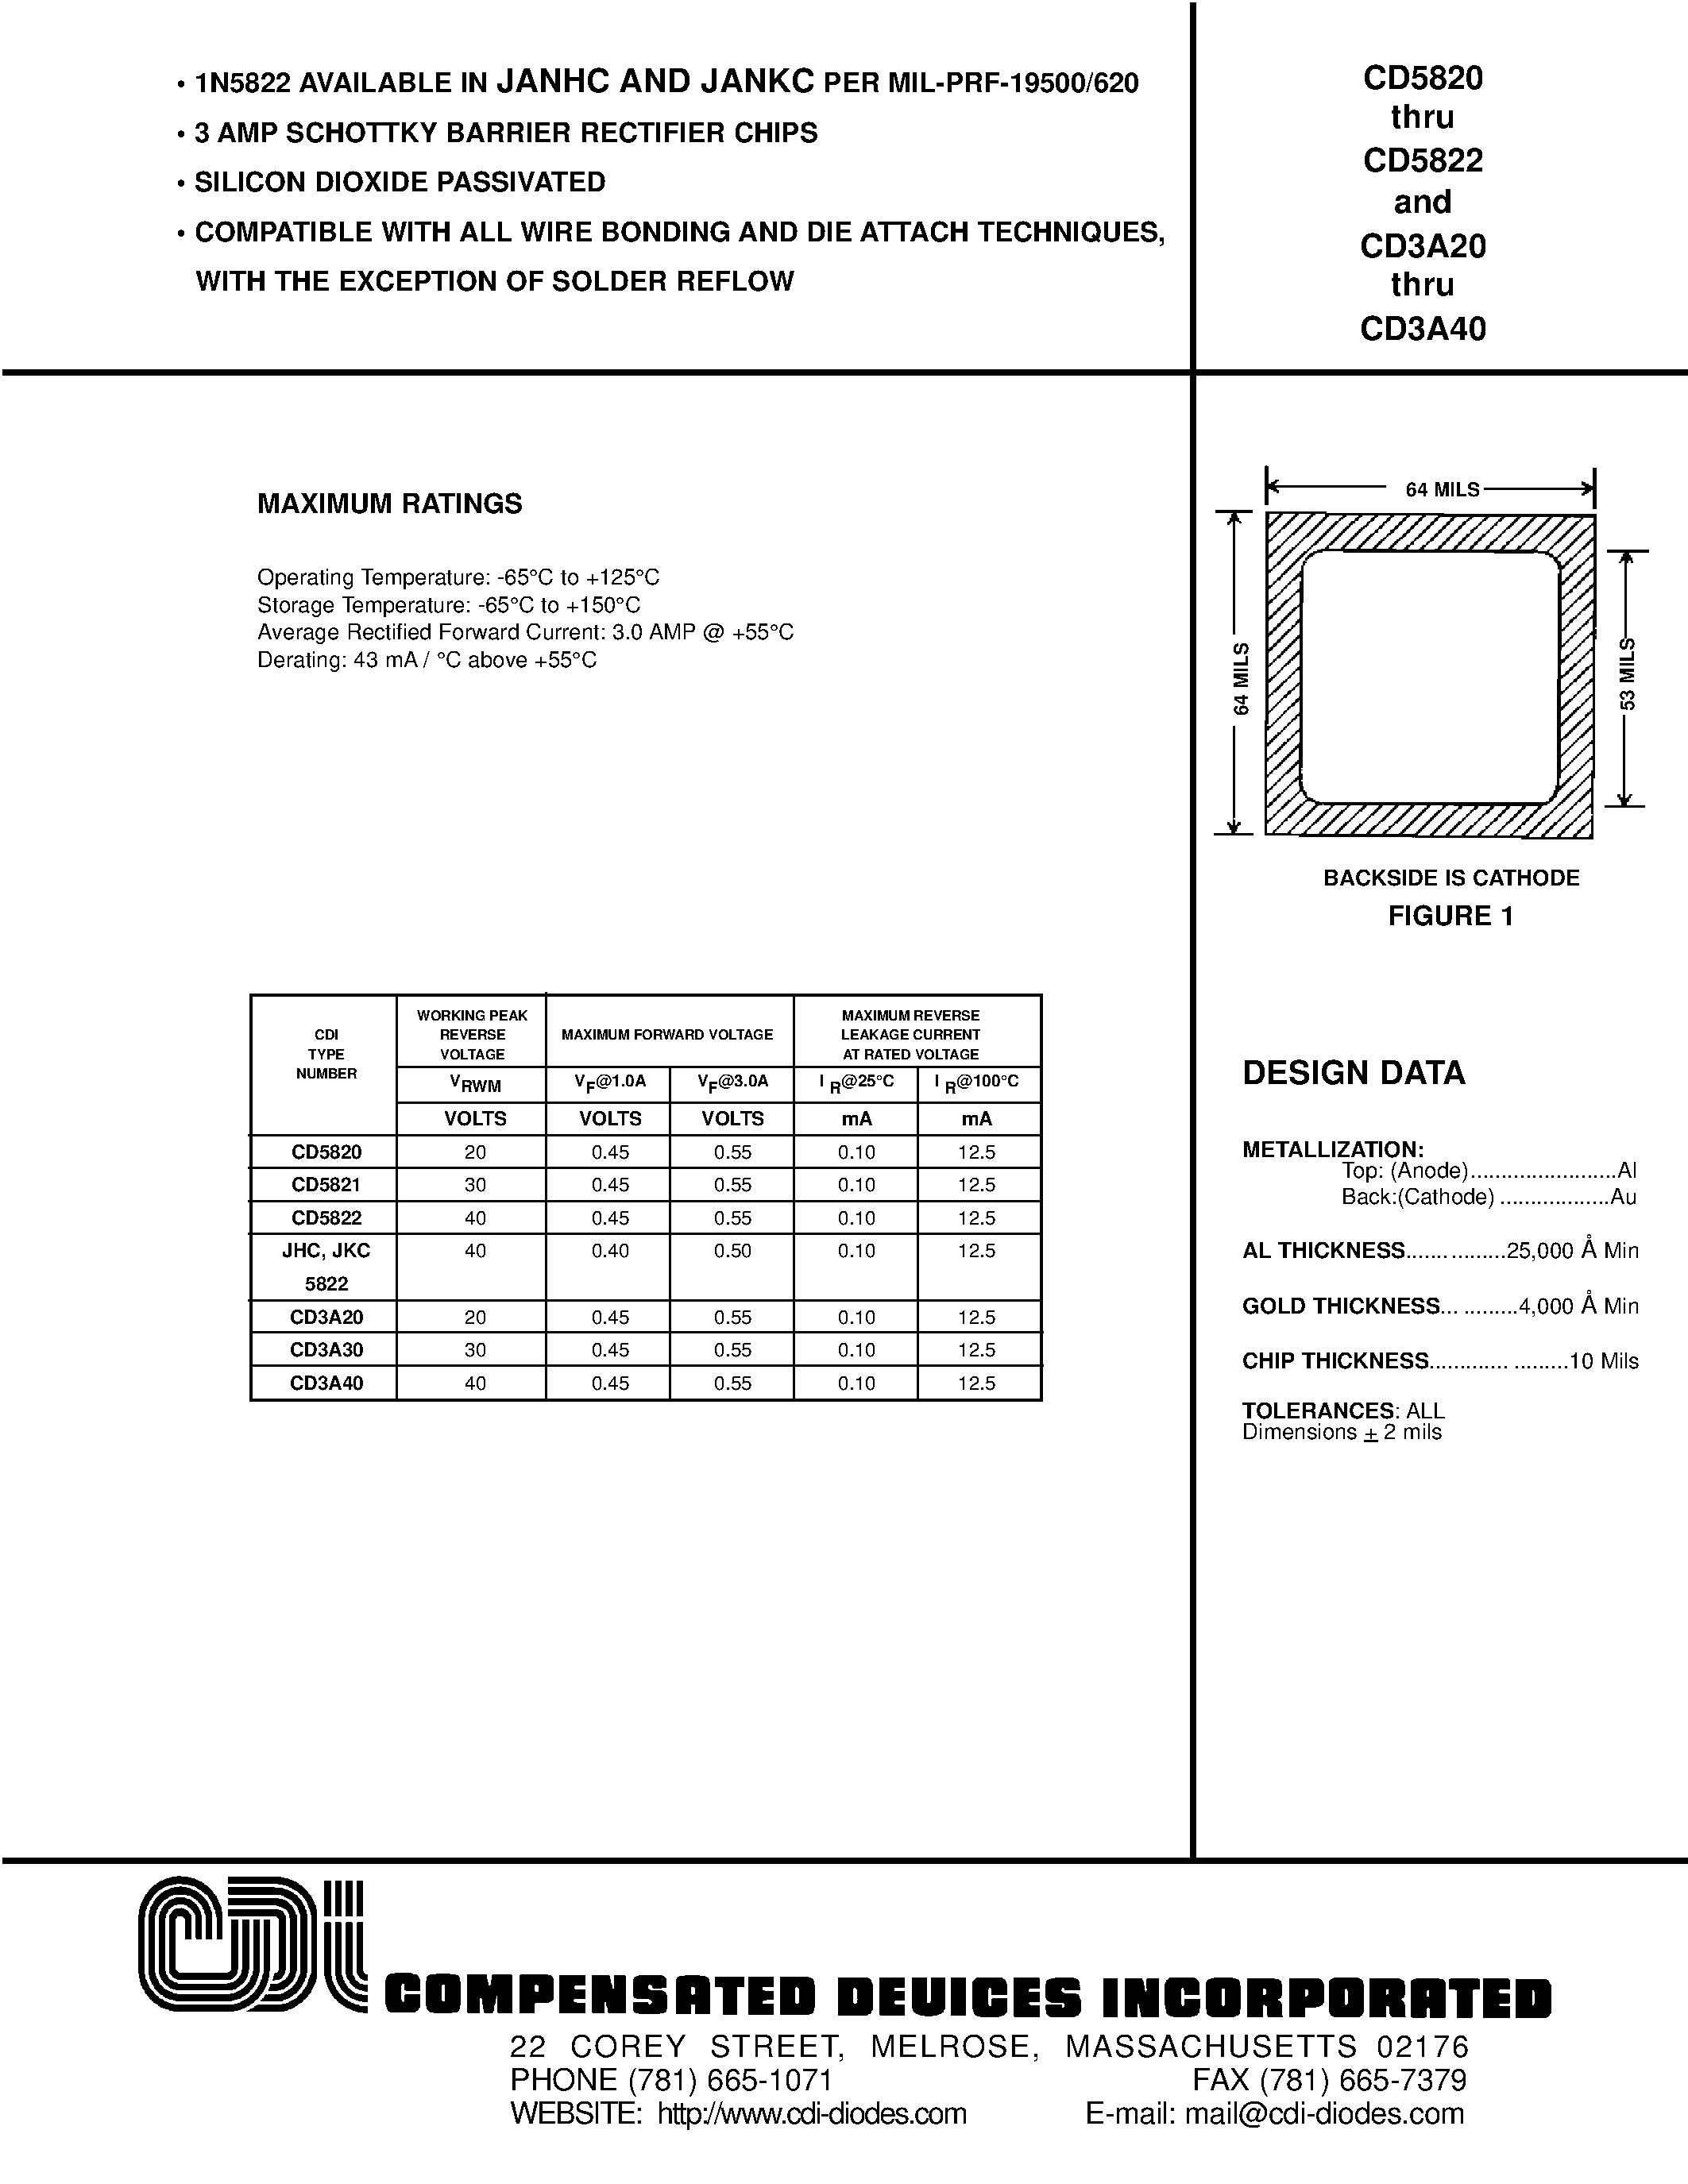 Datasheet CD3A20 - SILICON DIOXIDE PASSIVATED page 1